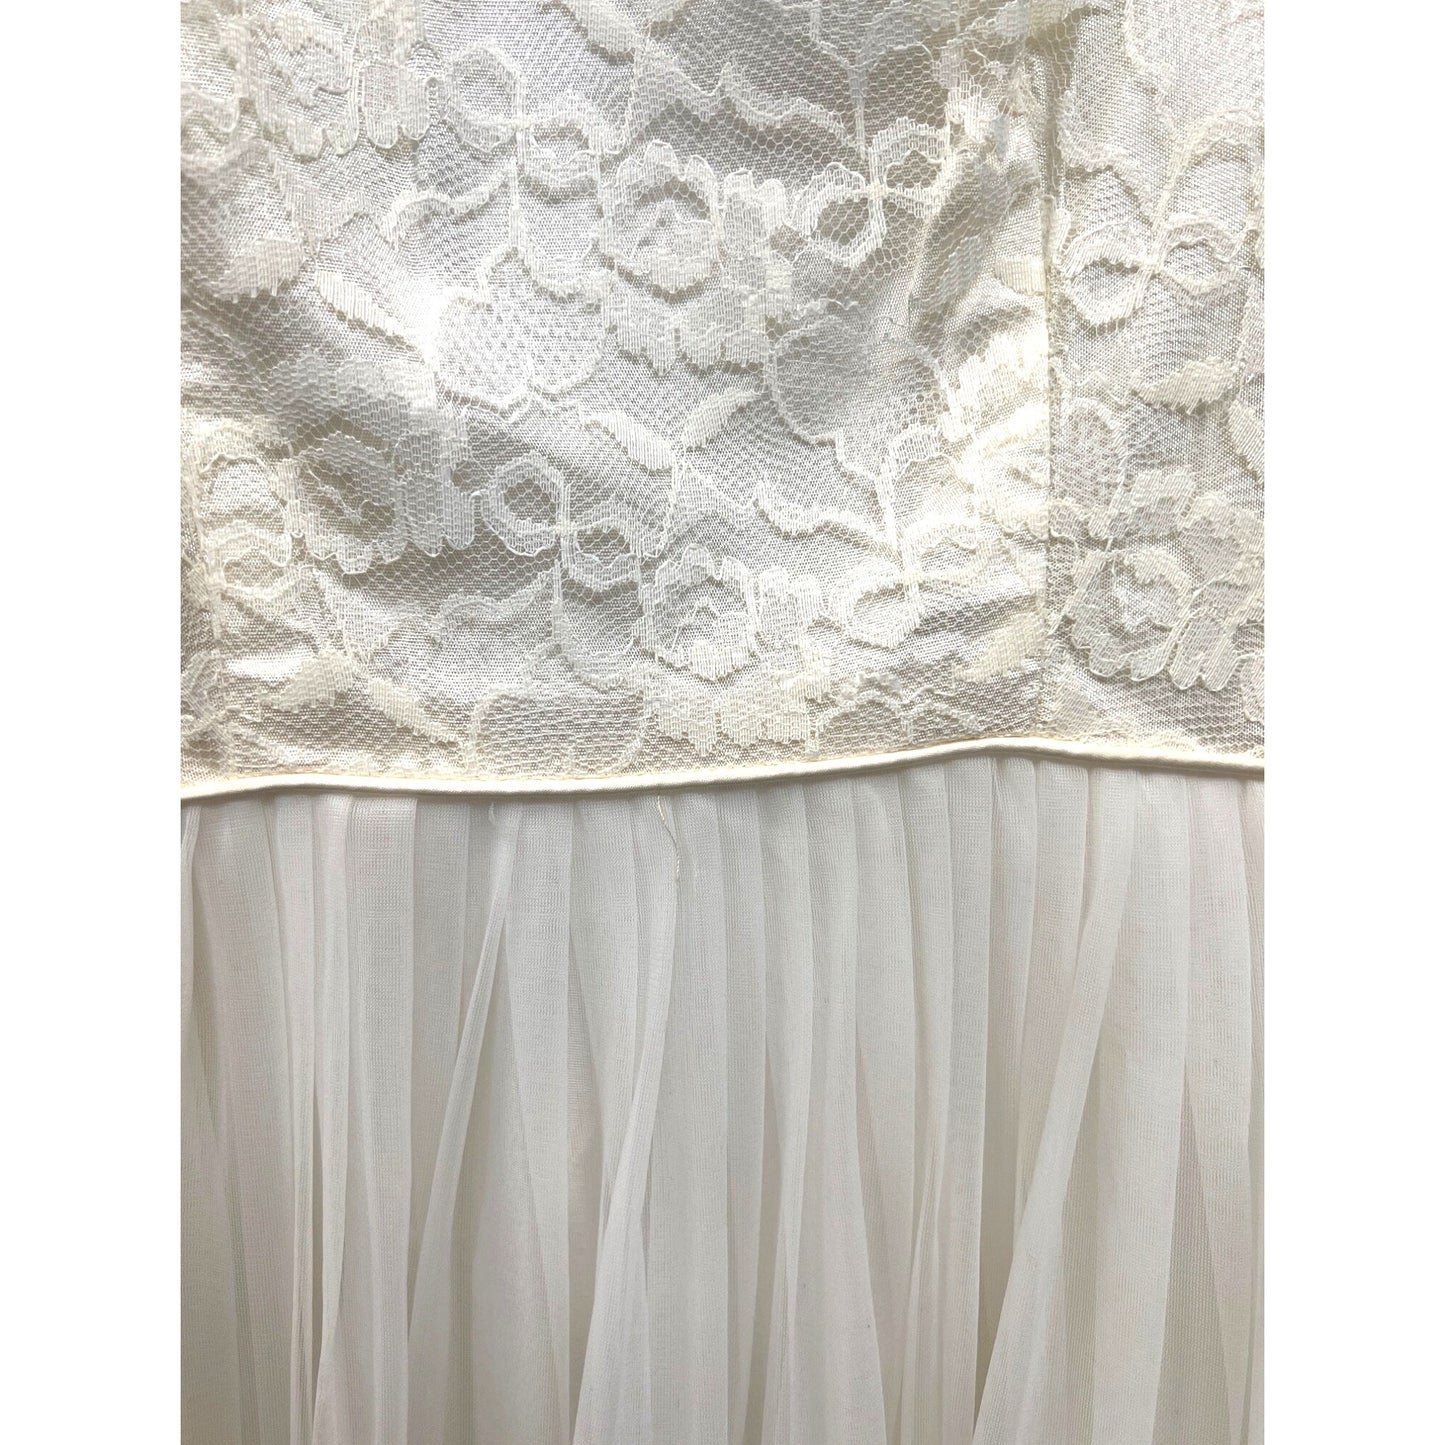 Vintage 1950's Ivory Tulle and Lace A-Line Wedding Dress